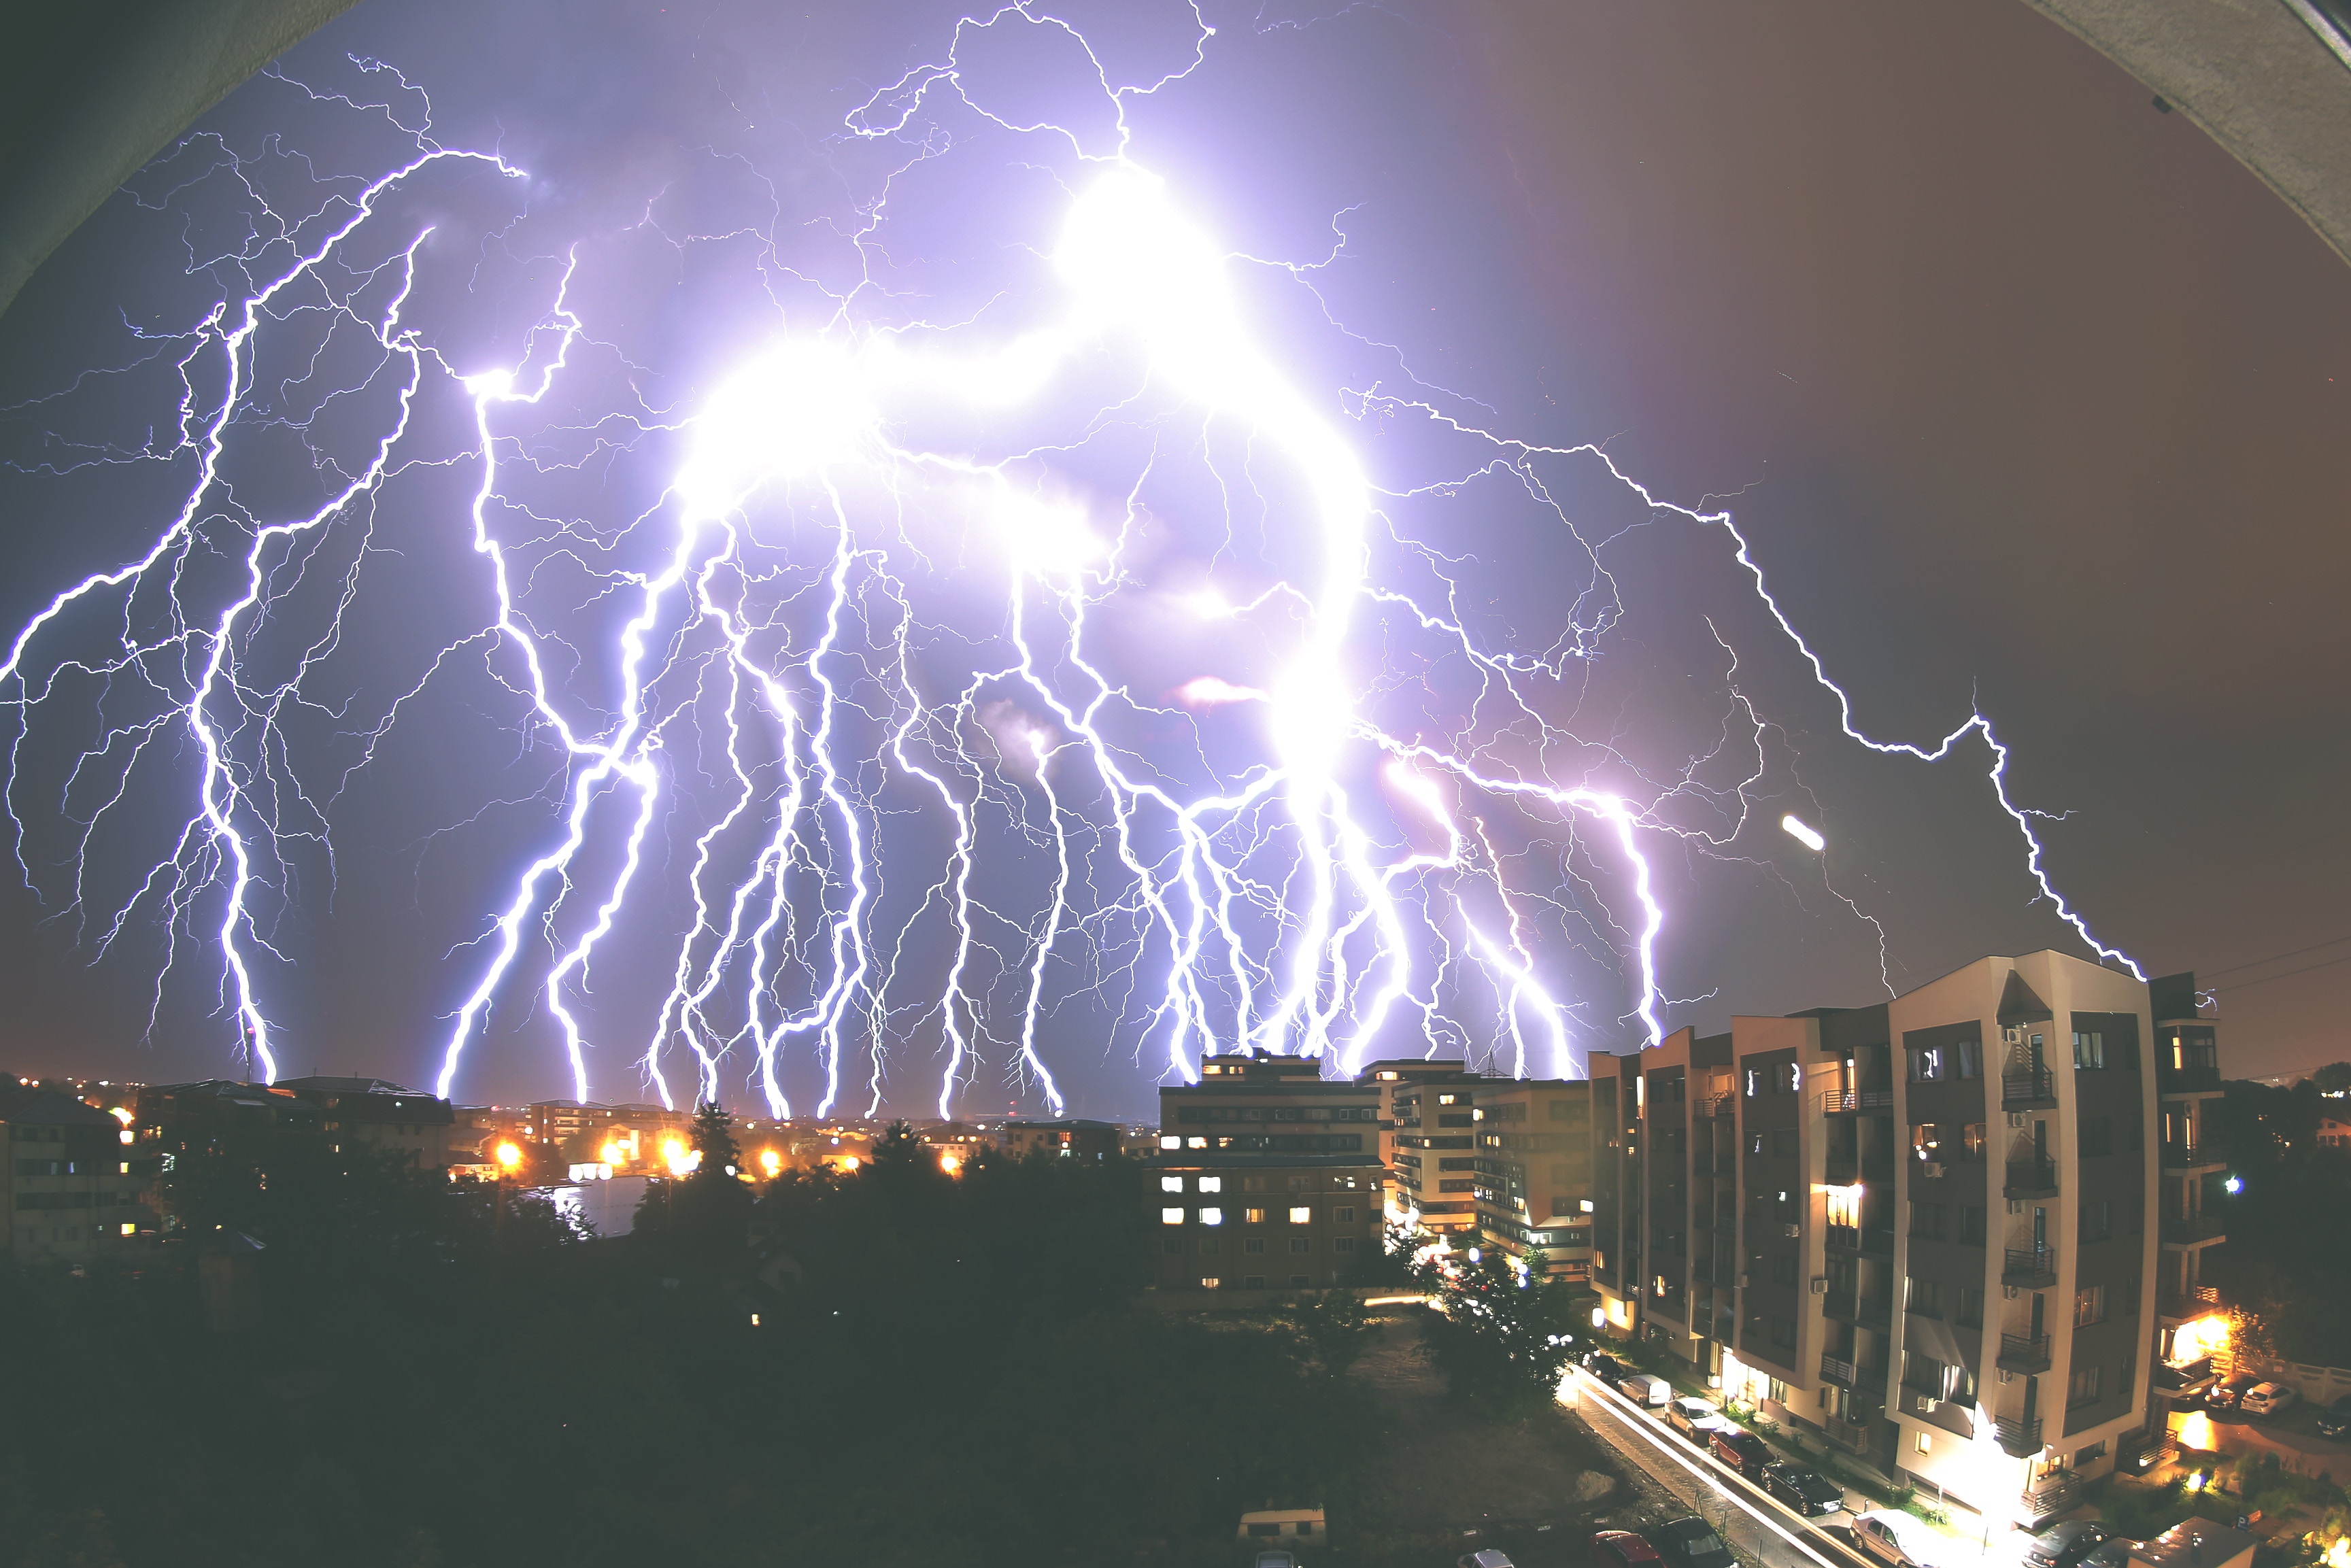 Free Images  Thunderstorm